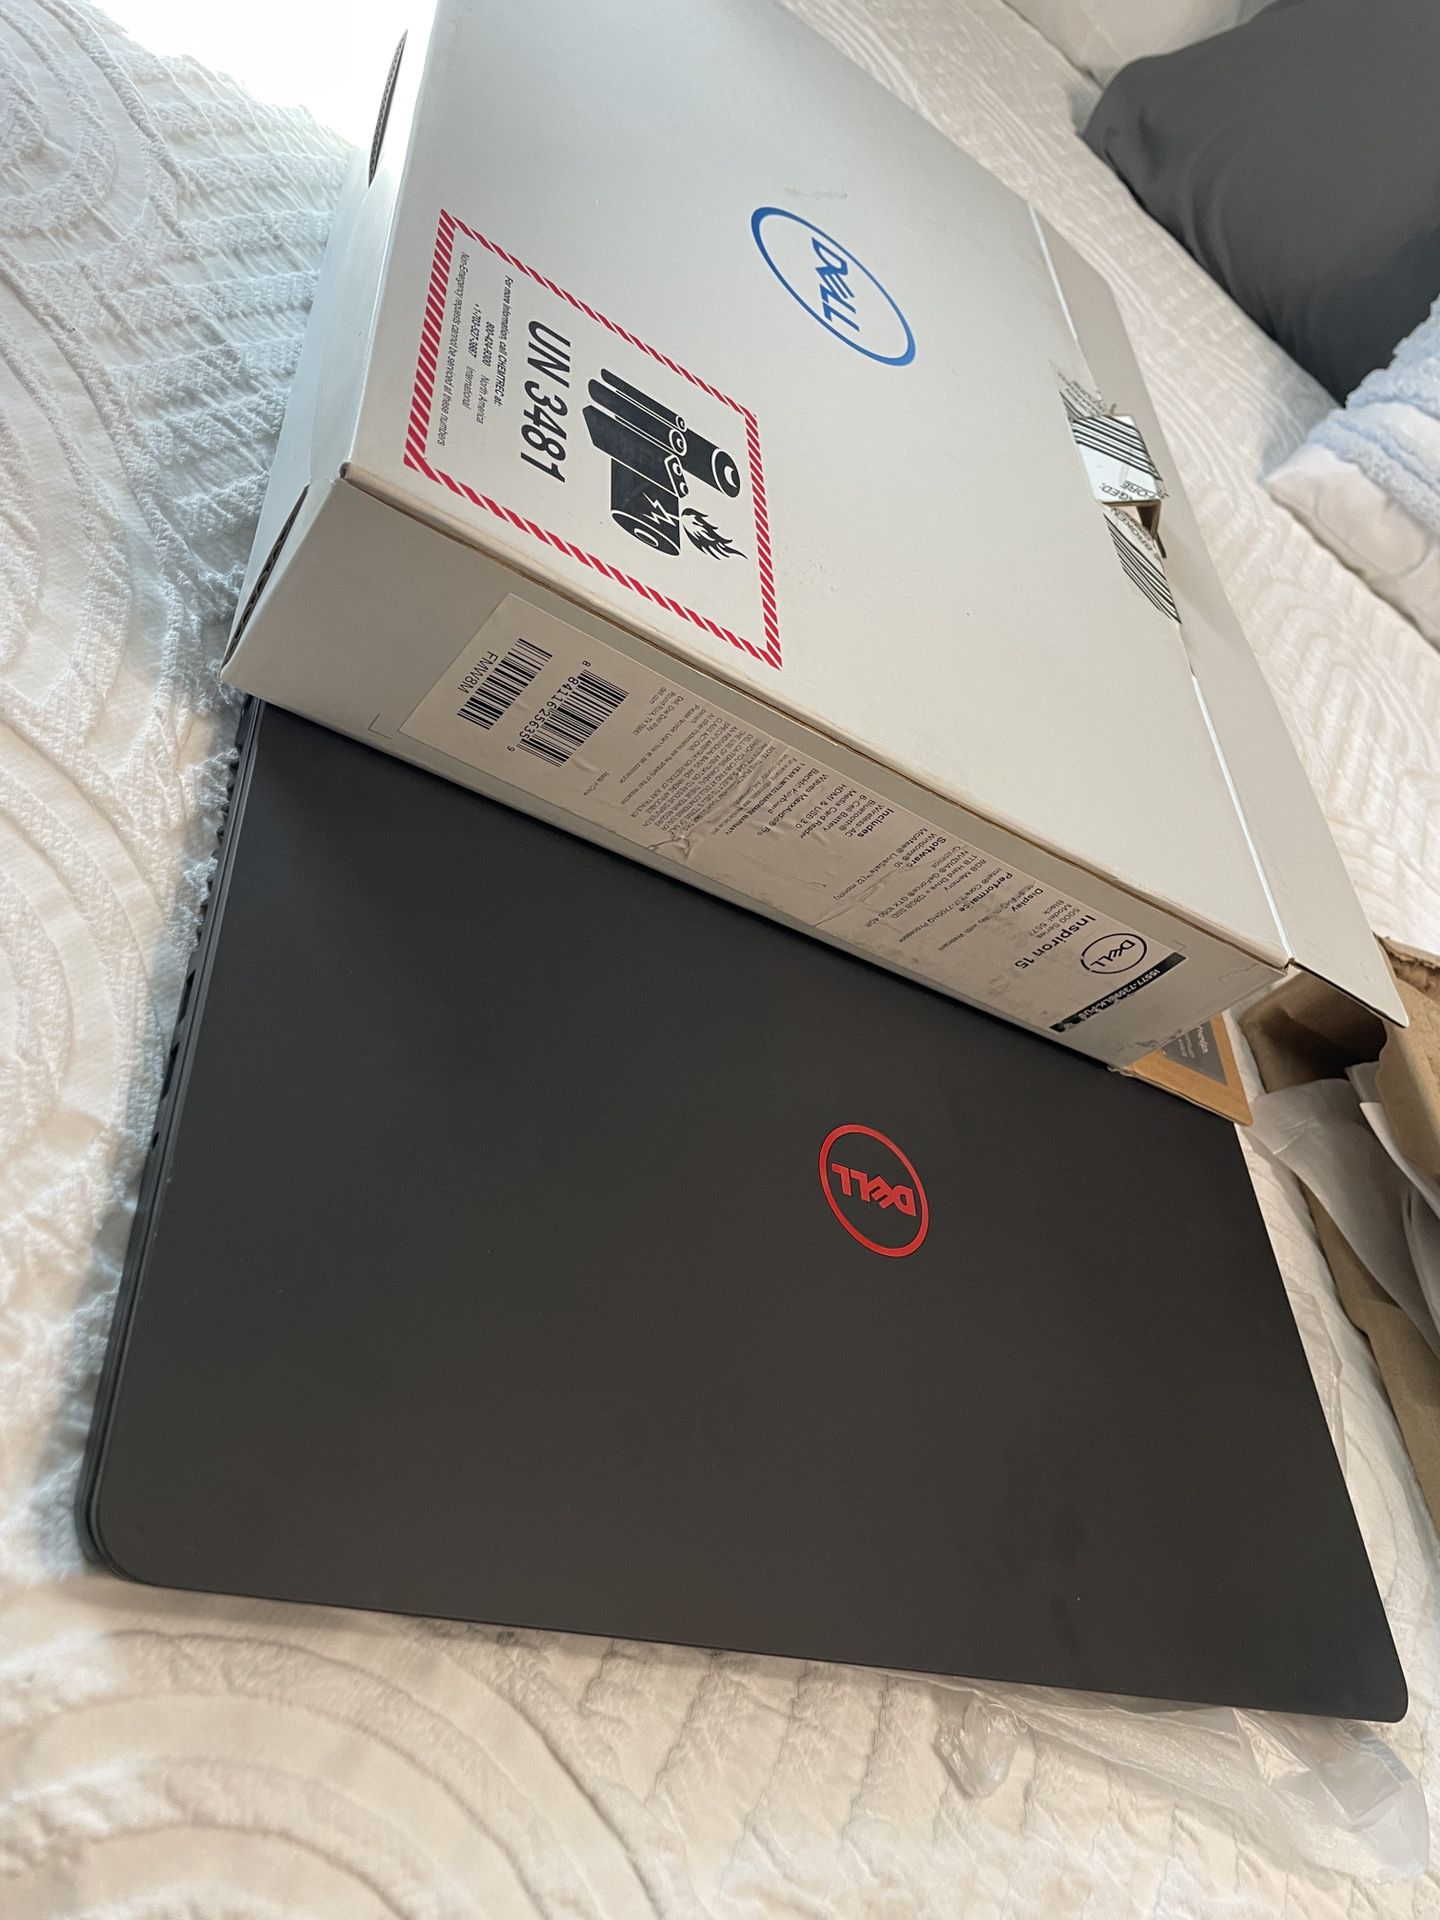 Dell Inspiron 15 Gaming/Video Editing Laptop